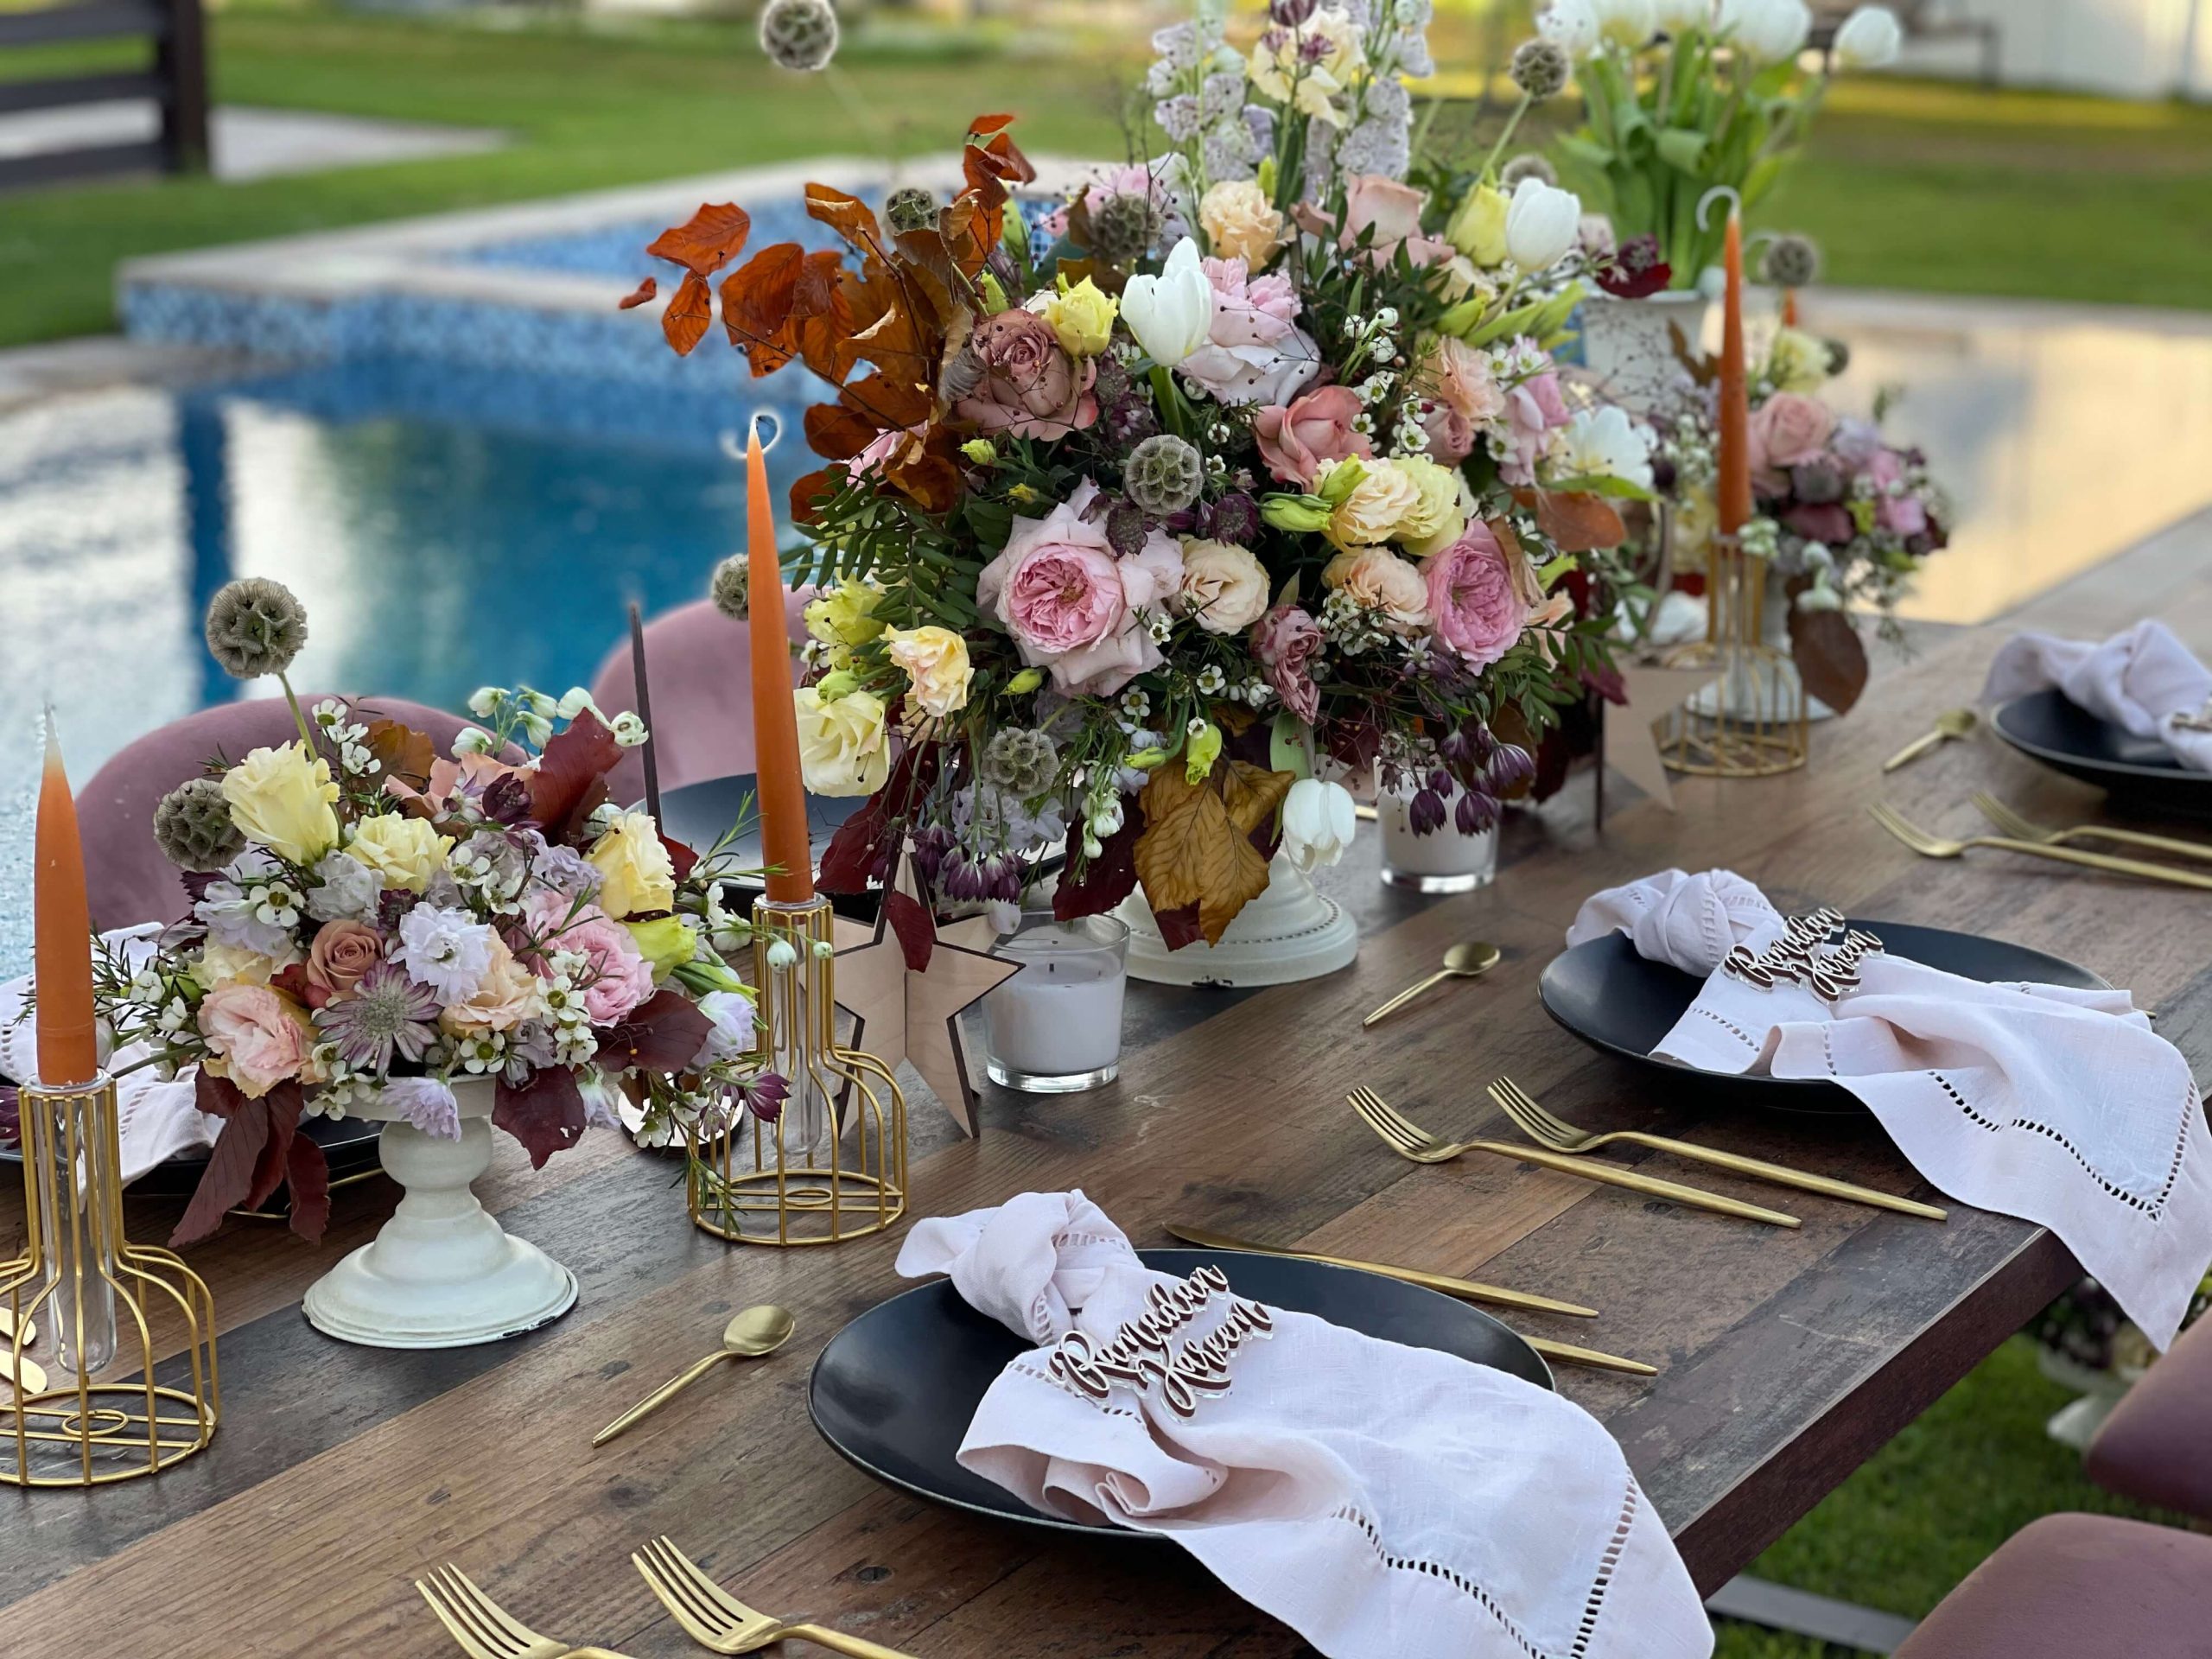 Beautiful Table set up with flower decorations - 7PQRS